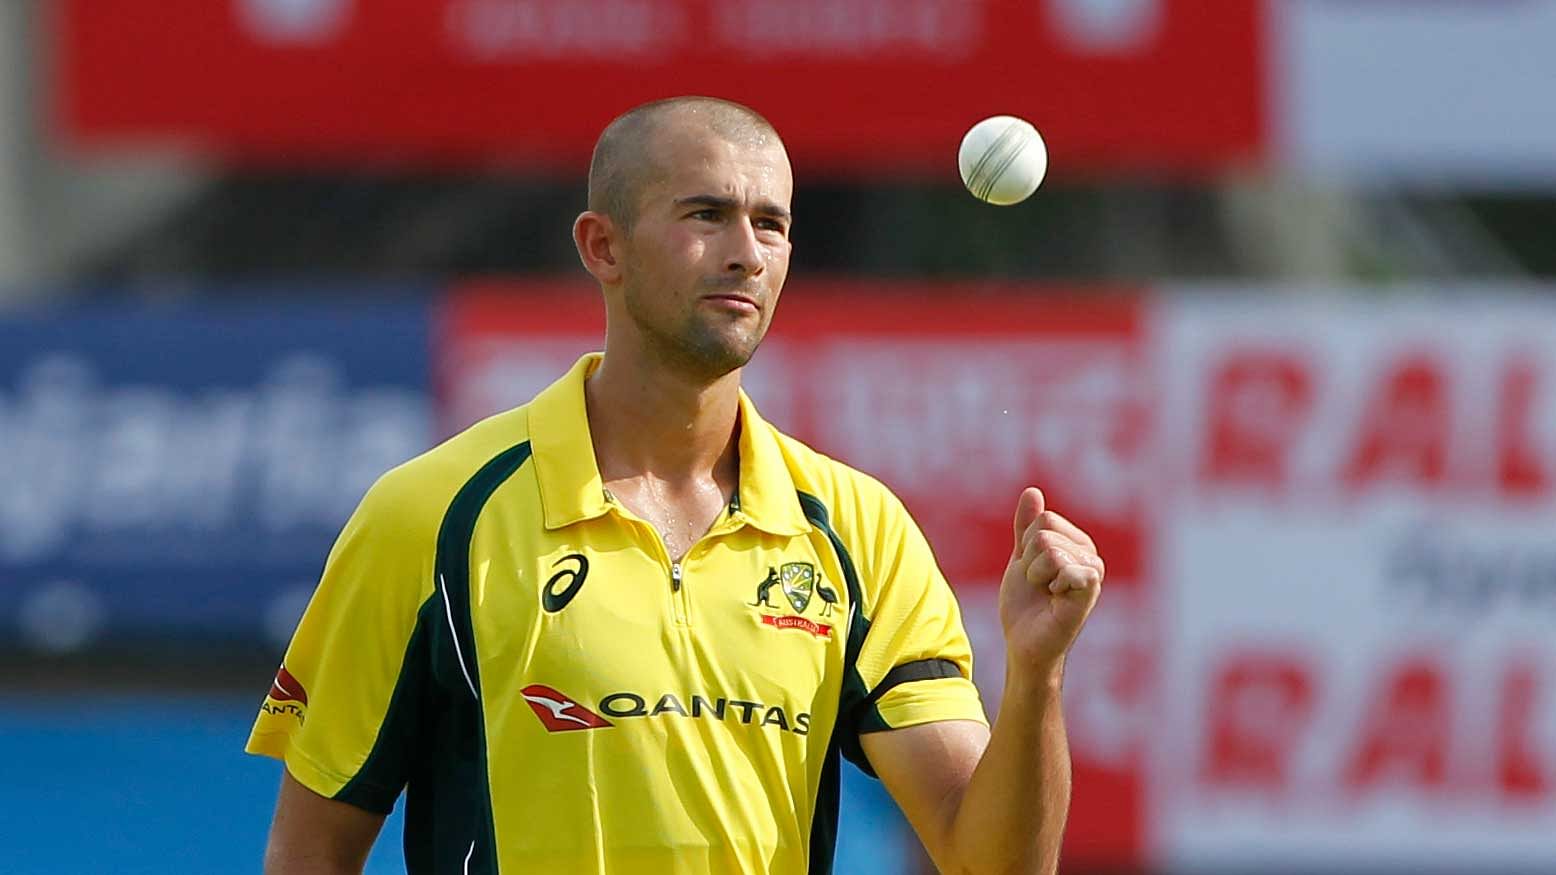 Ashton Agar will be returning home after injuring his finger on Sunday.&nbsp;